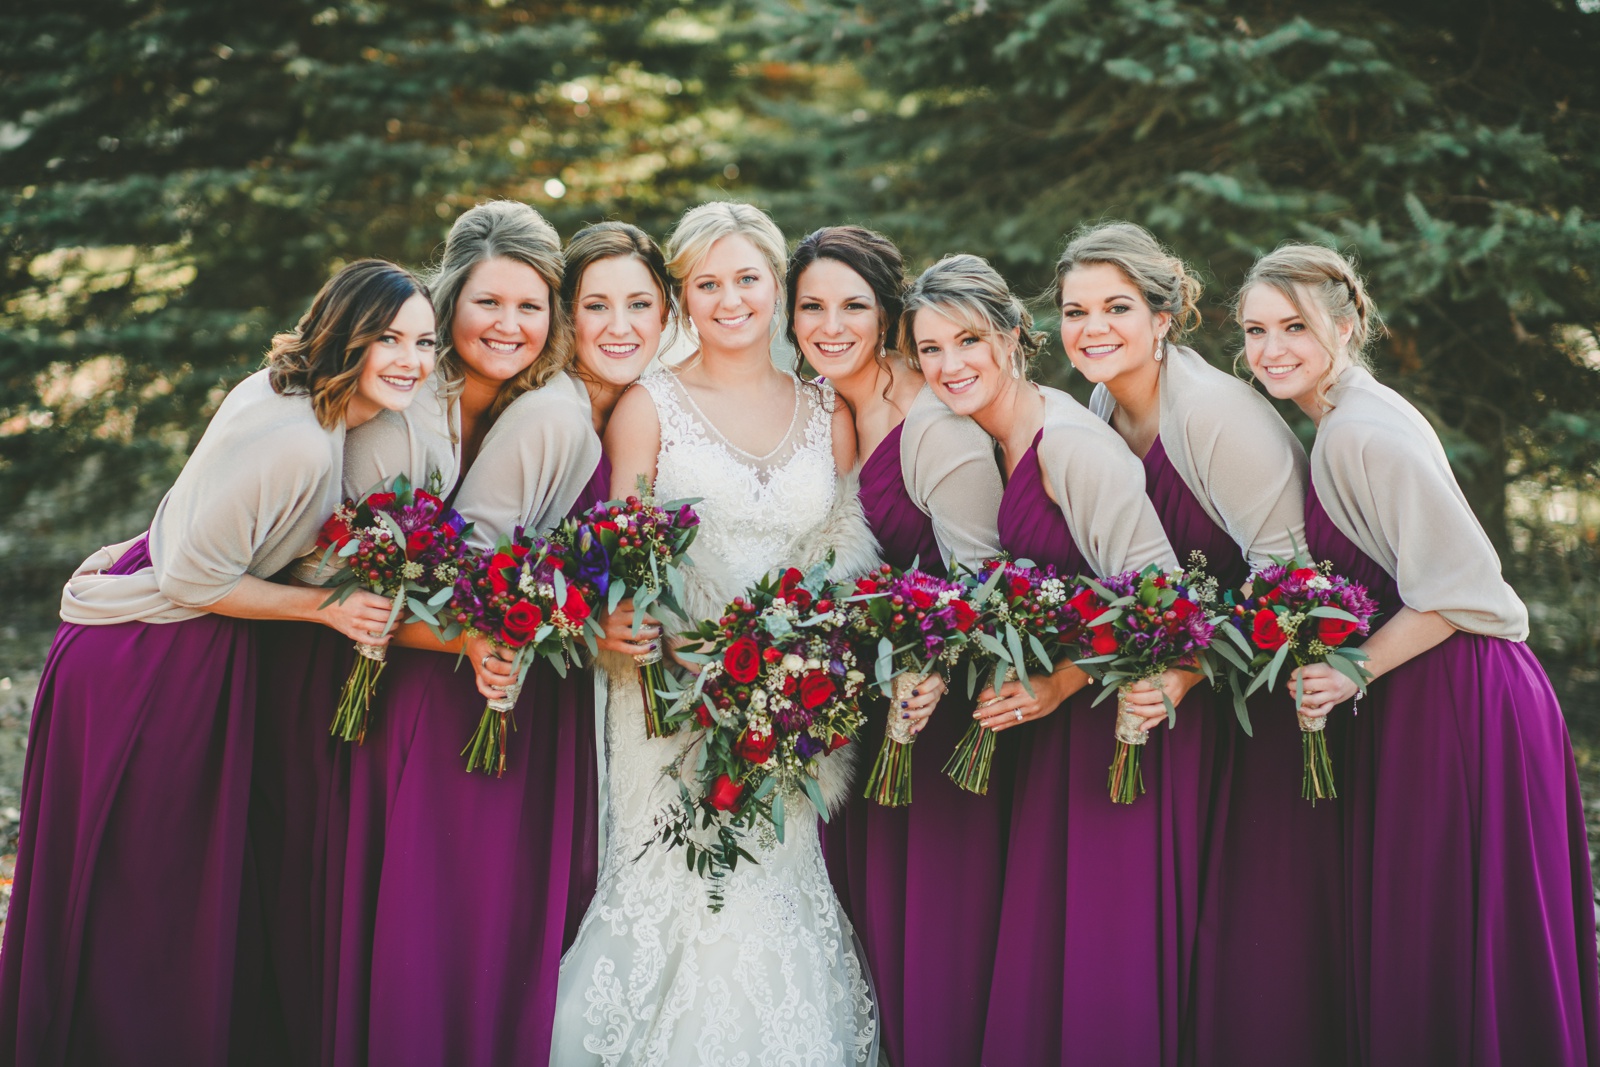 Shana & Weston | Champaign, IL Mulberry & Charcoal Events at the ...